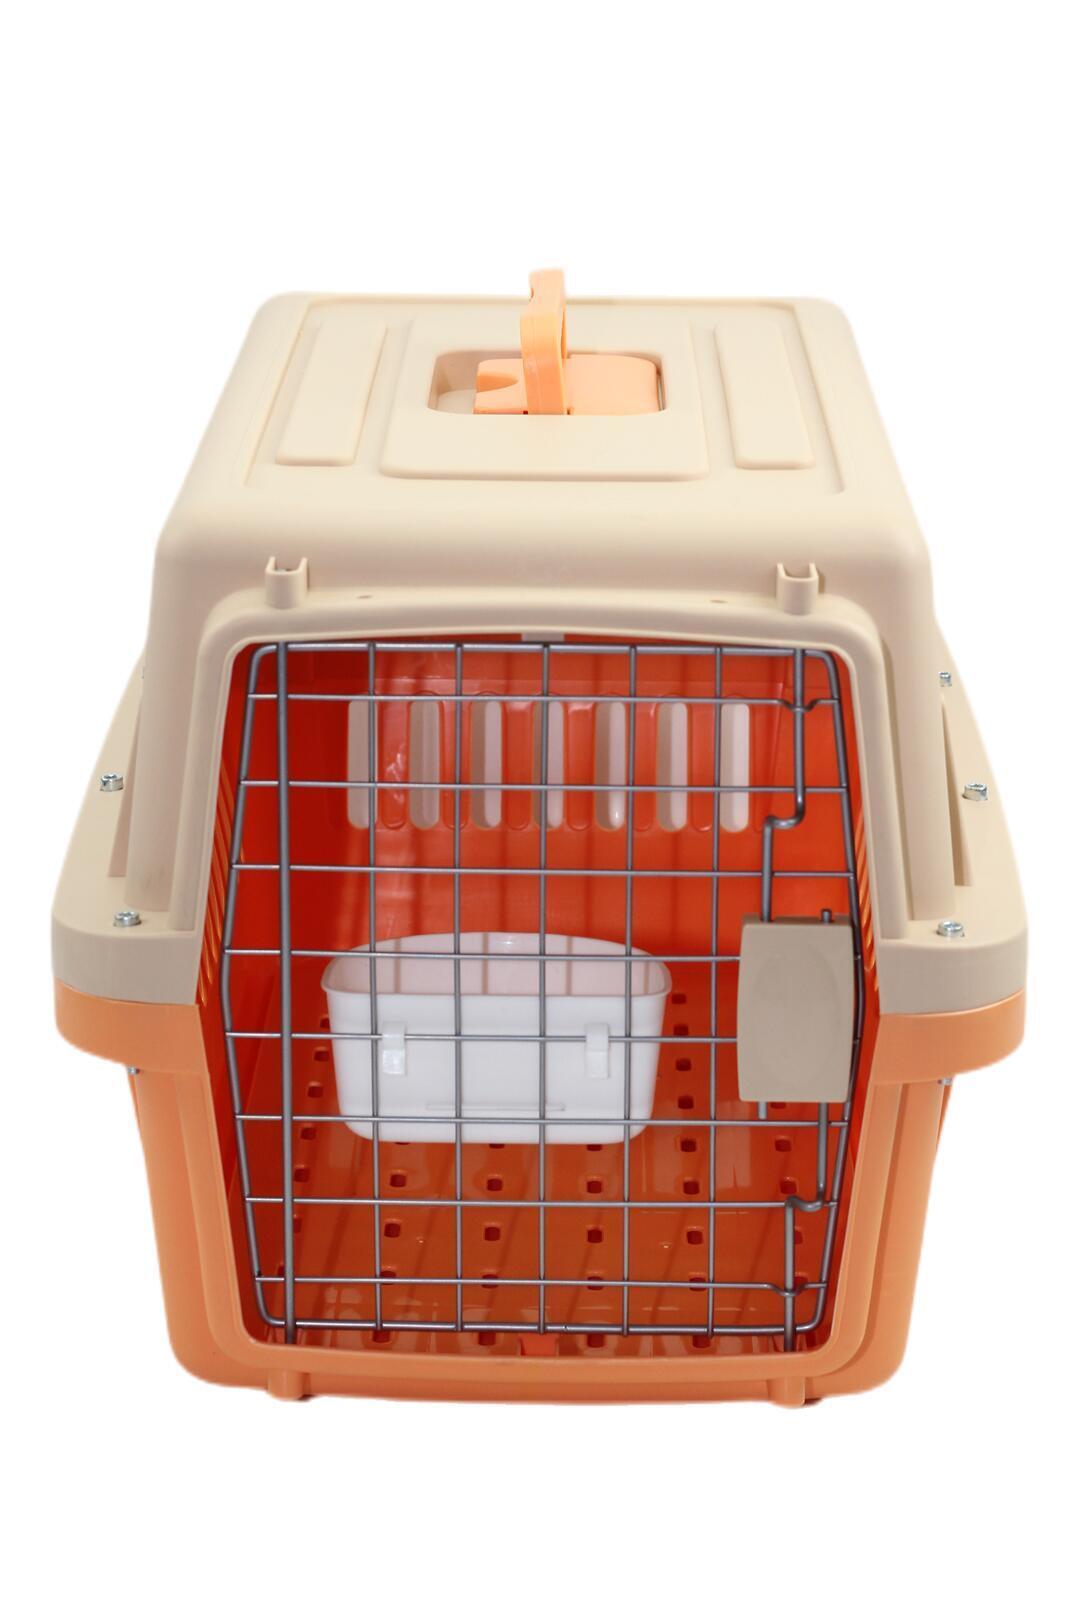 YES4PETS Small Dog Cat Crate Pet Airline Carrier Cage With Bowl and Tray-Orange